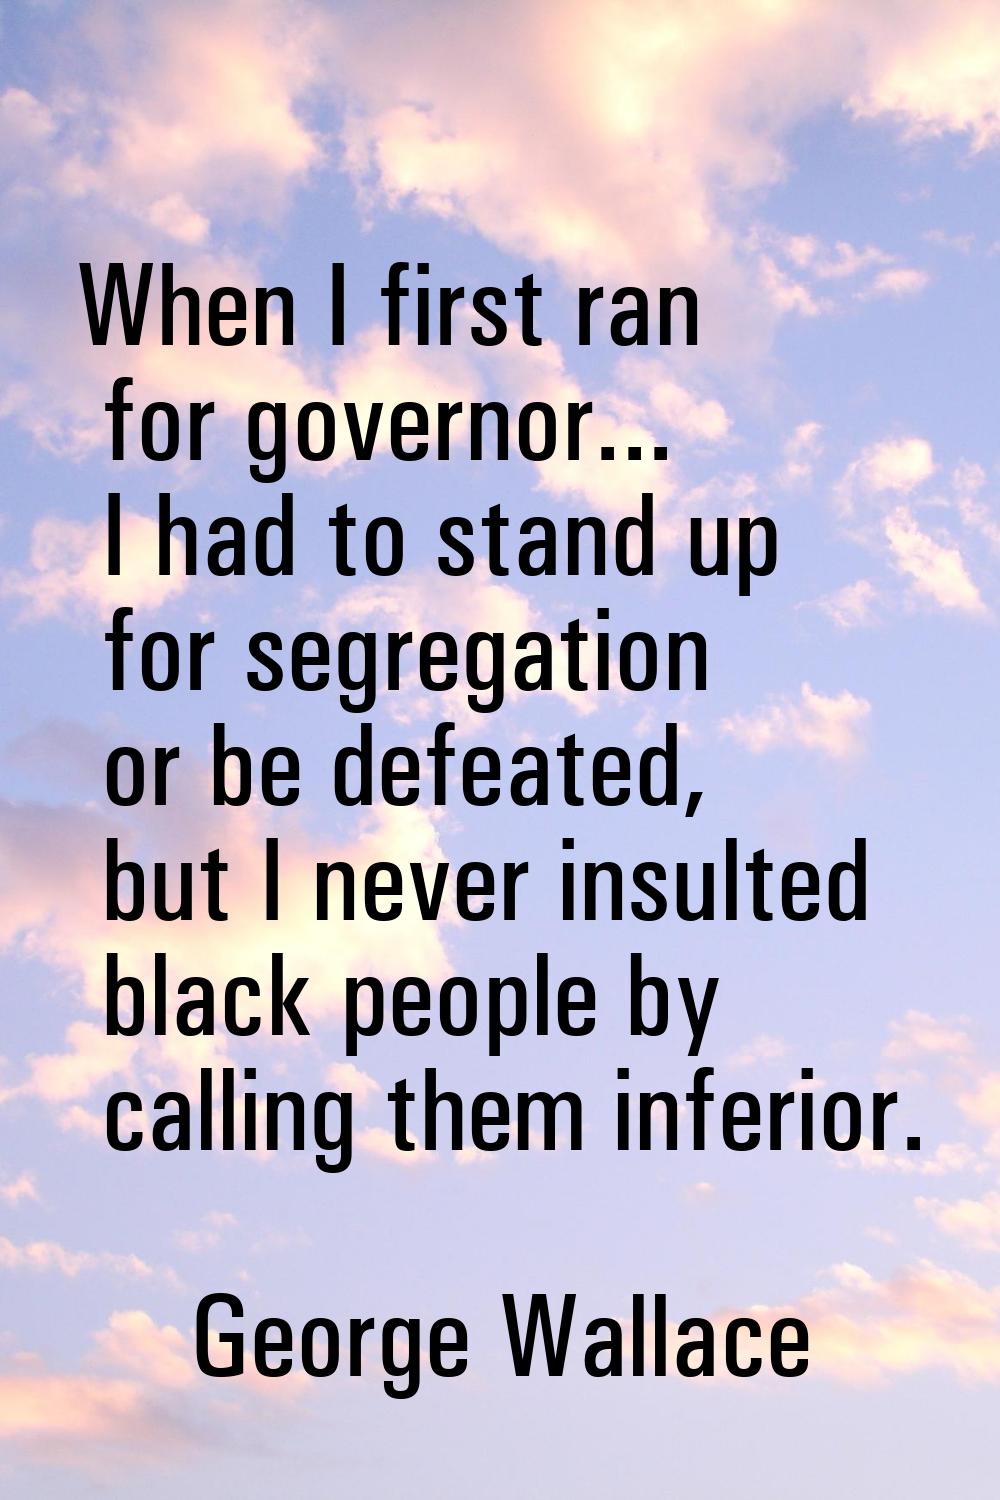 When I first ran for governor... I had to stand up for segregation or be defeated, but I never insu